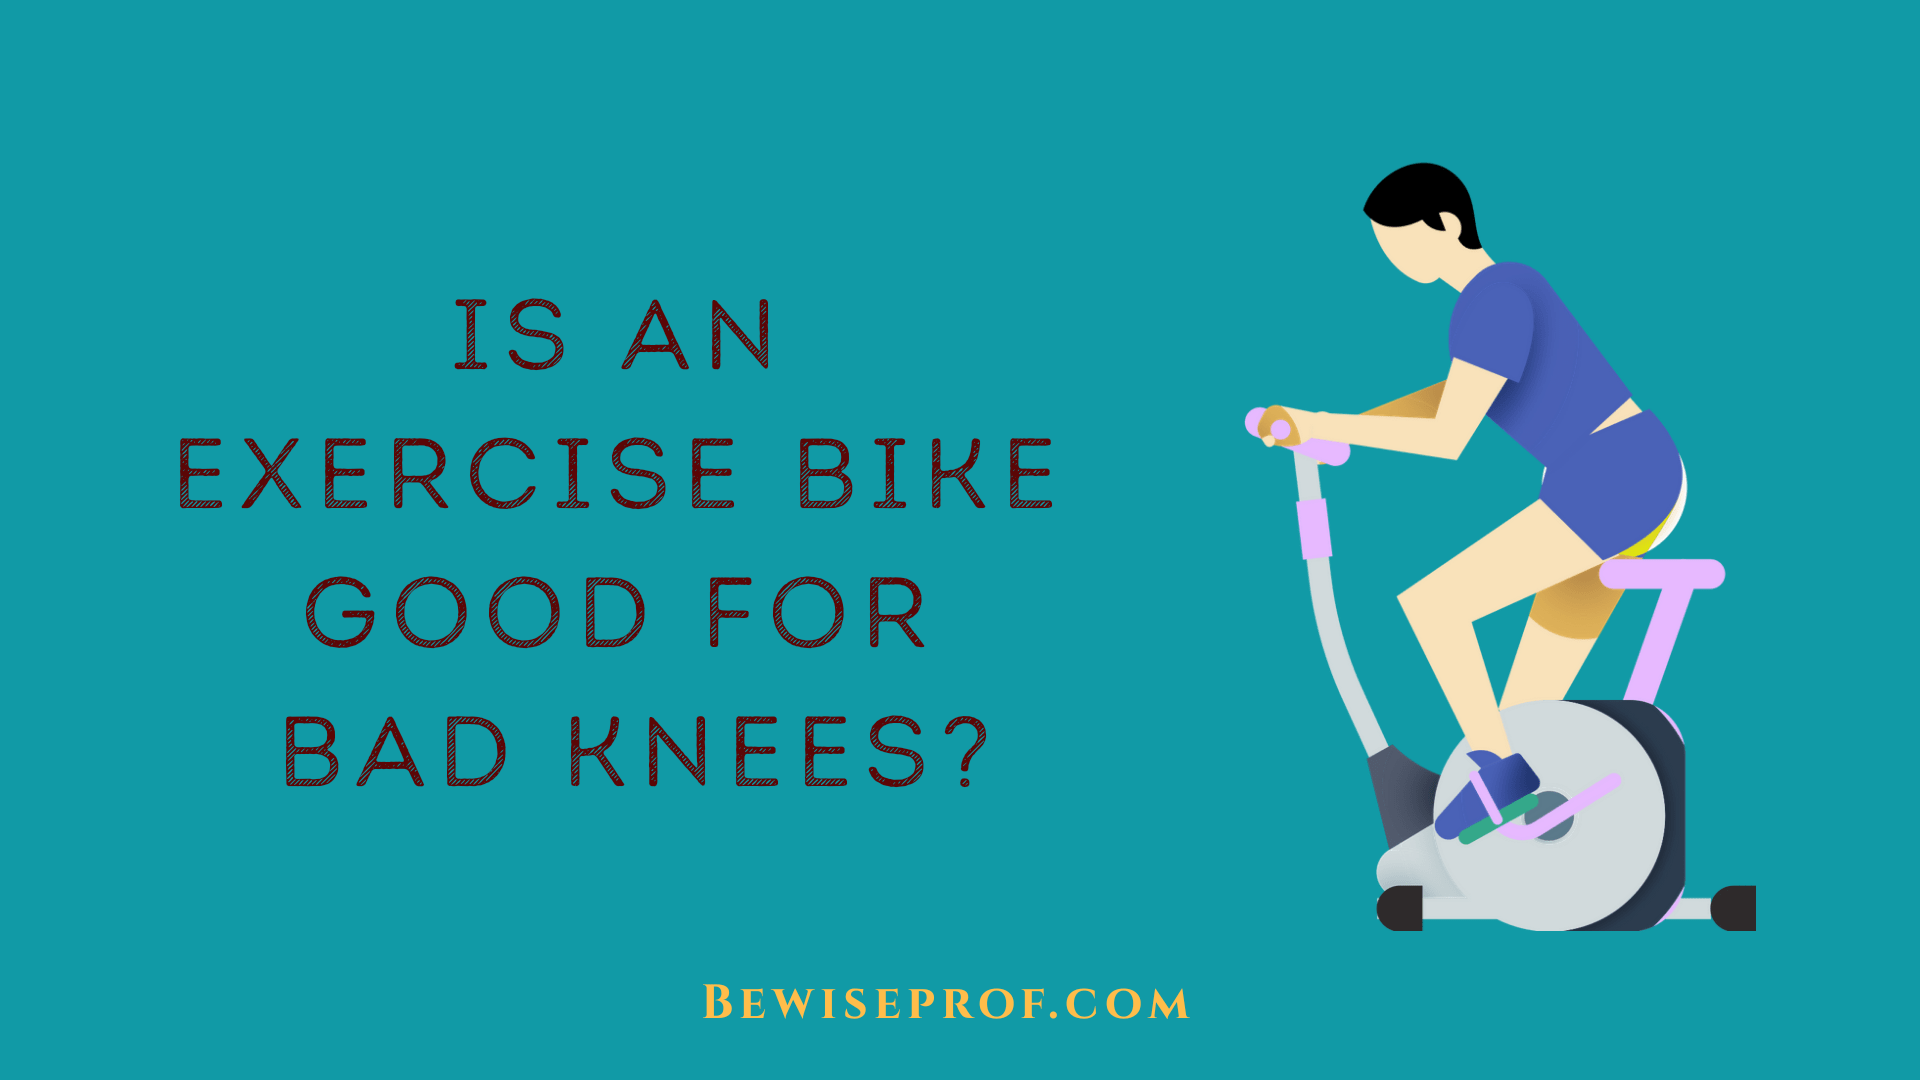 Is an exercise bike good for bad knees